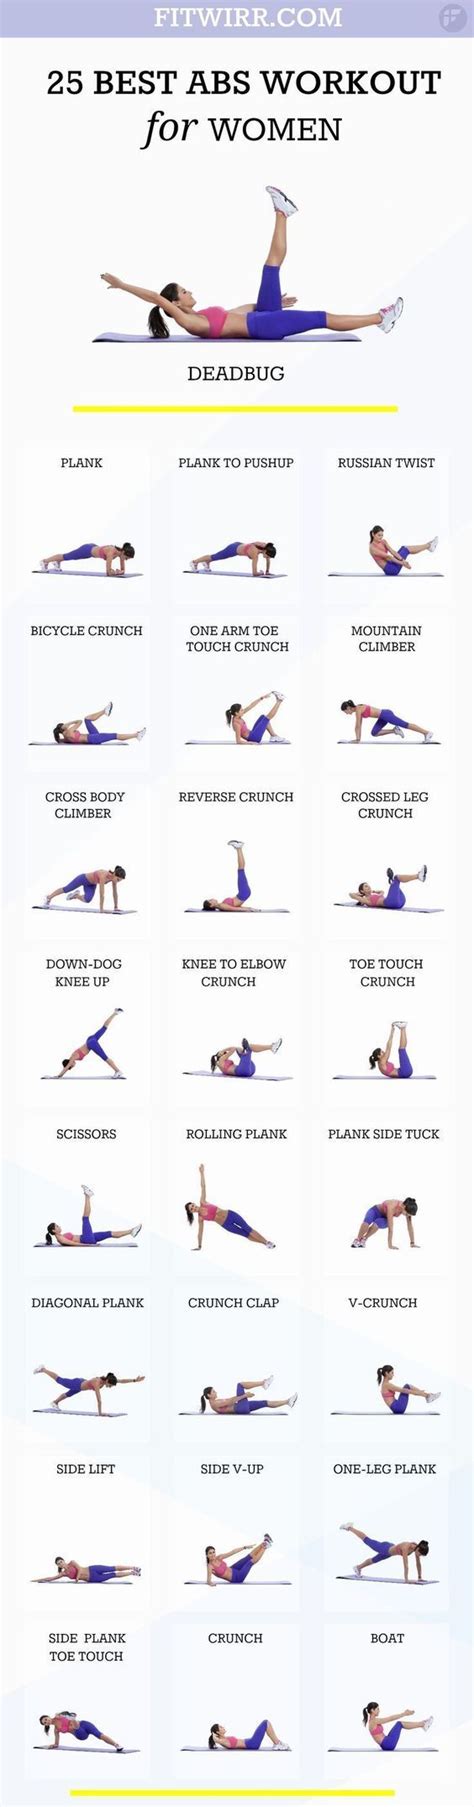 25 Best Ab Exercises For Women Must Do Ab Workout Fitwirr Abs